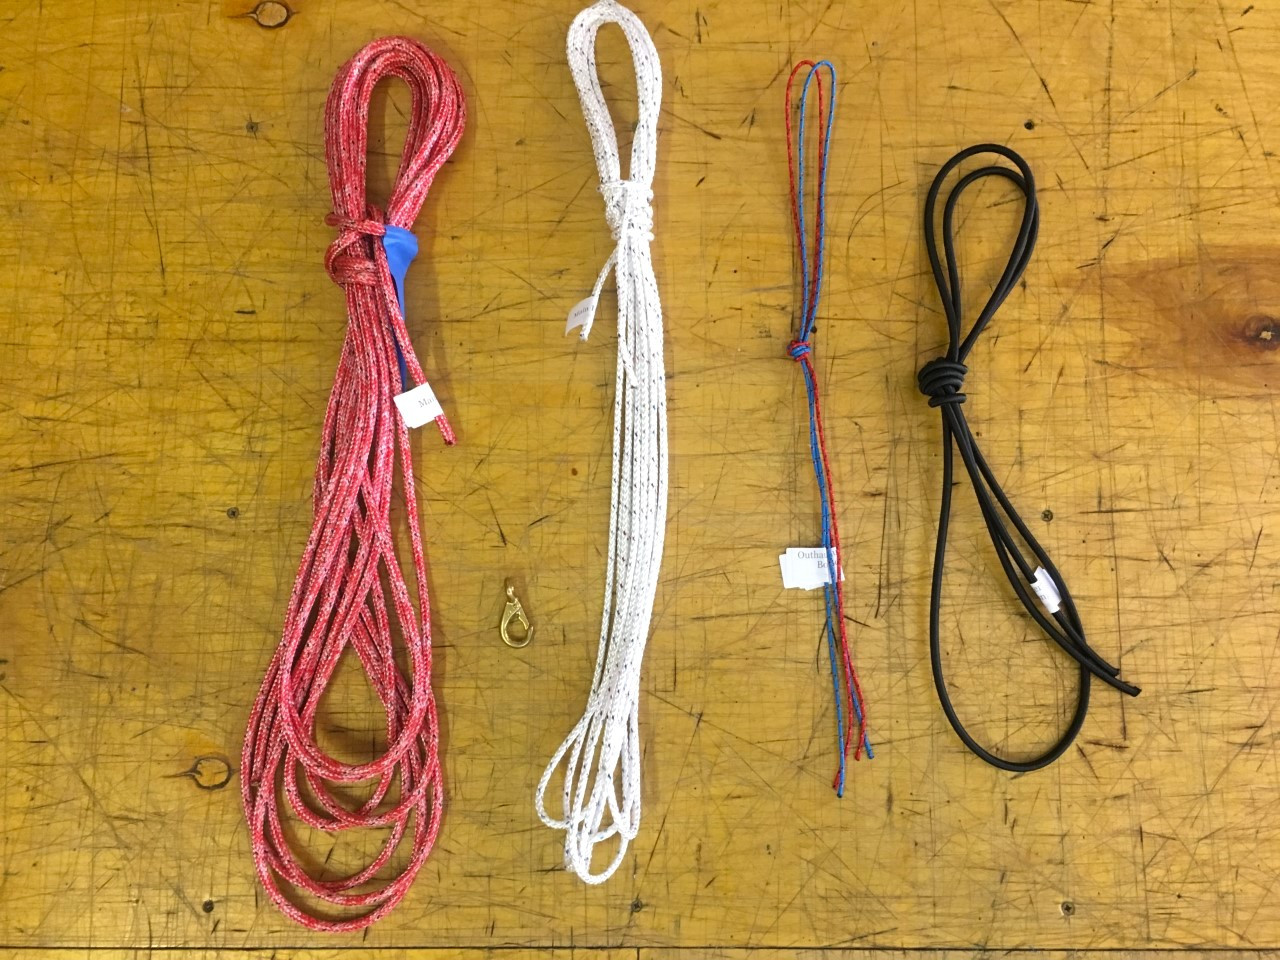 Dolphin Sr. Line Kit by SLO Sail and Canvas. Precut & labeled lines to replace running rigging on your Dolphin Sr. sailboat. 